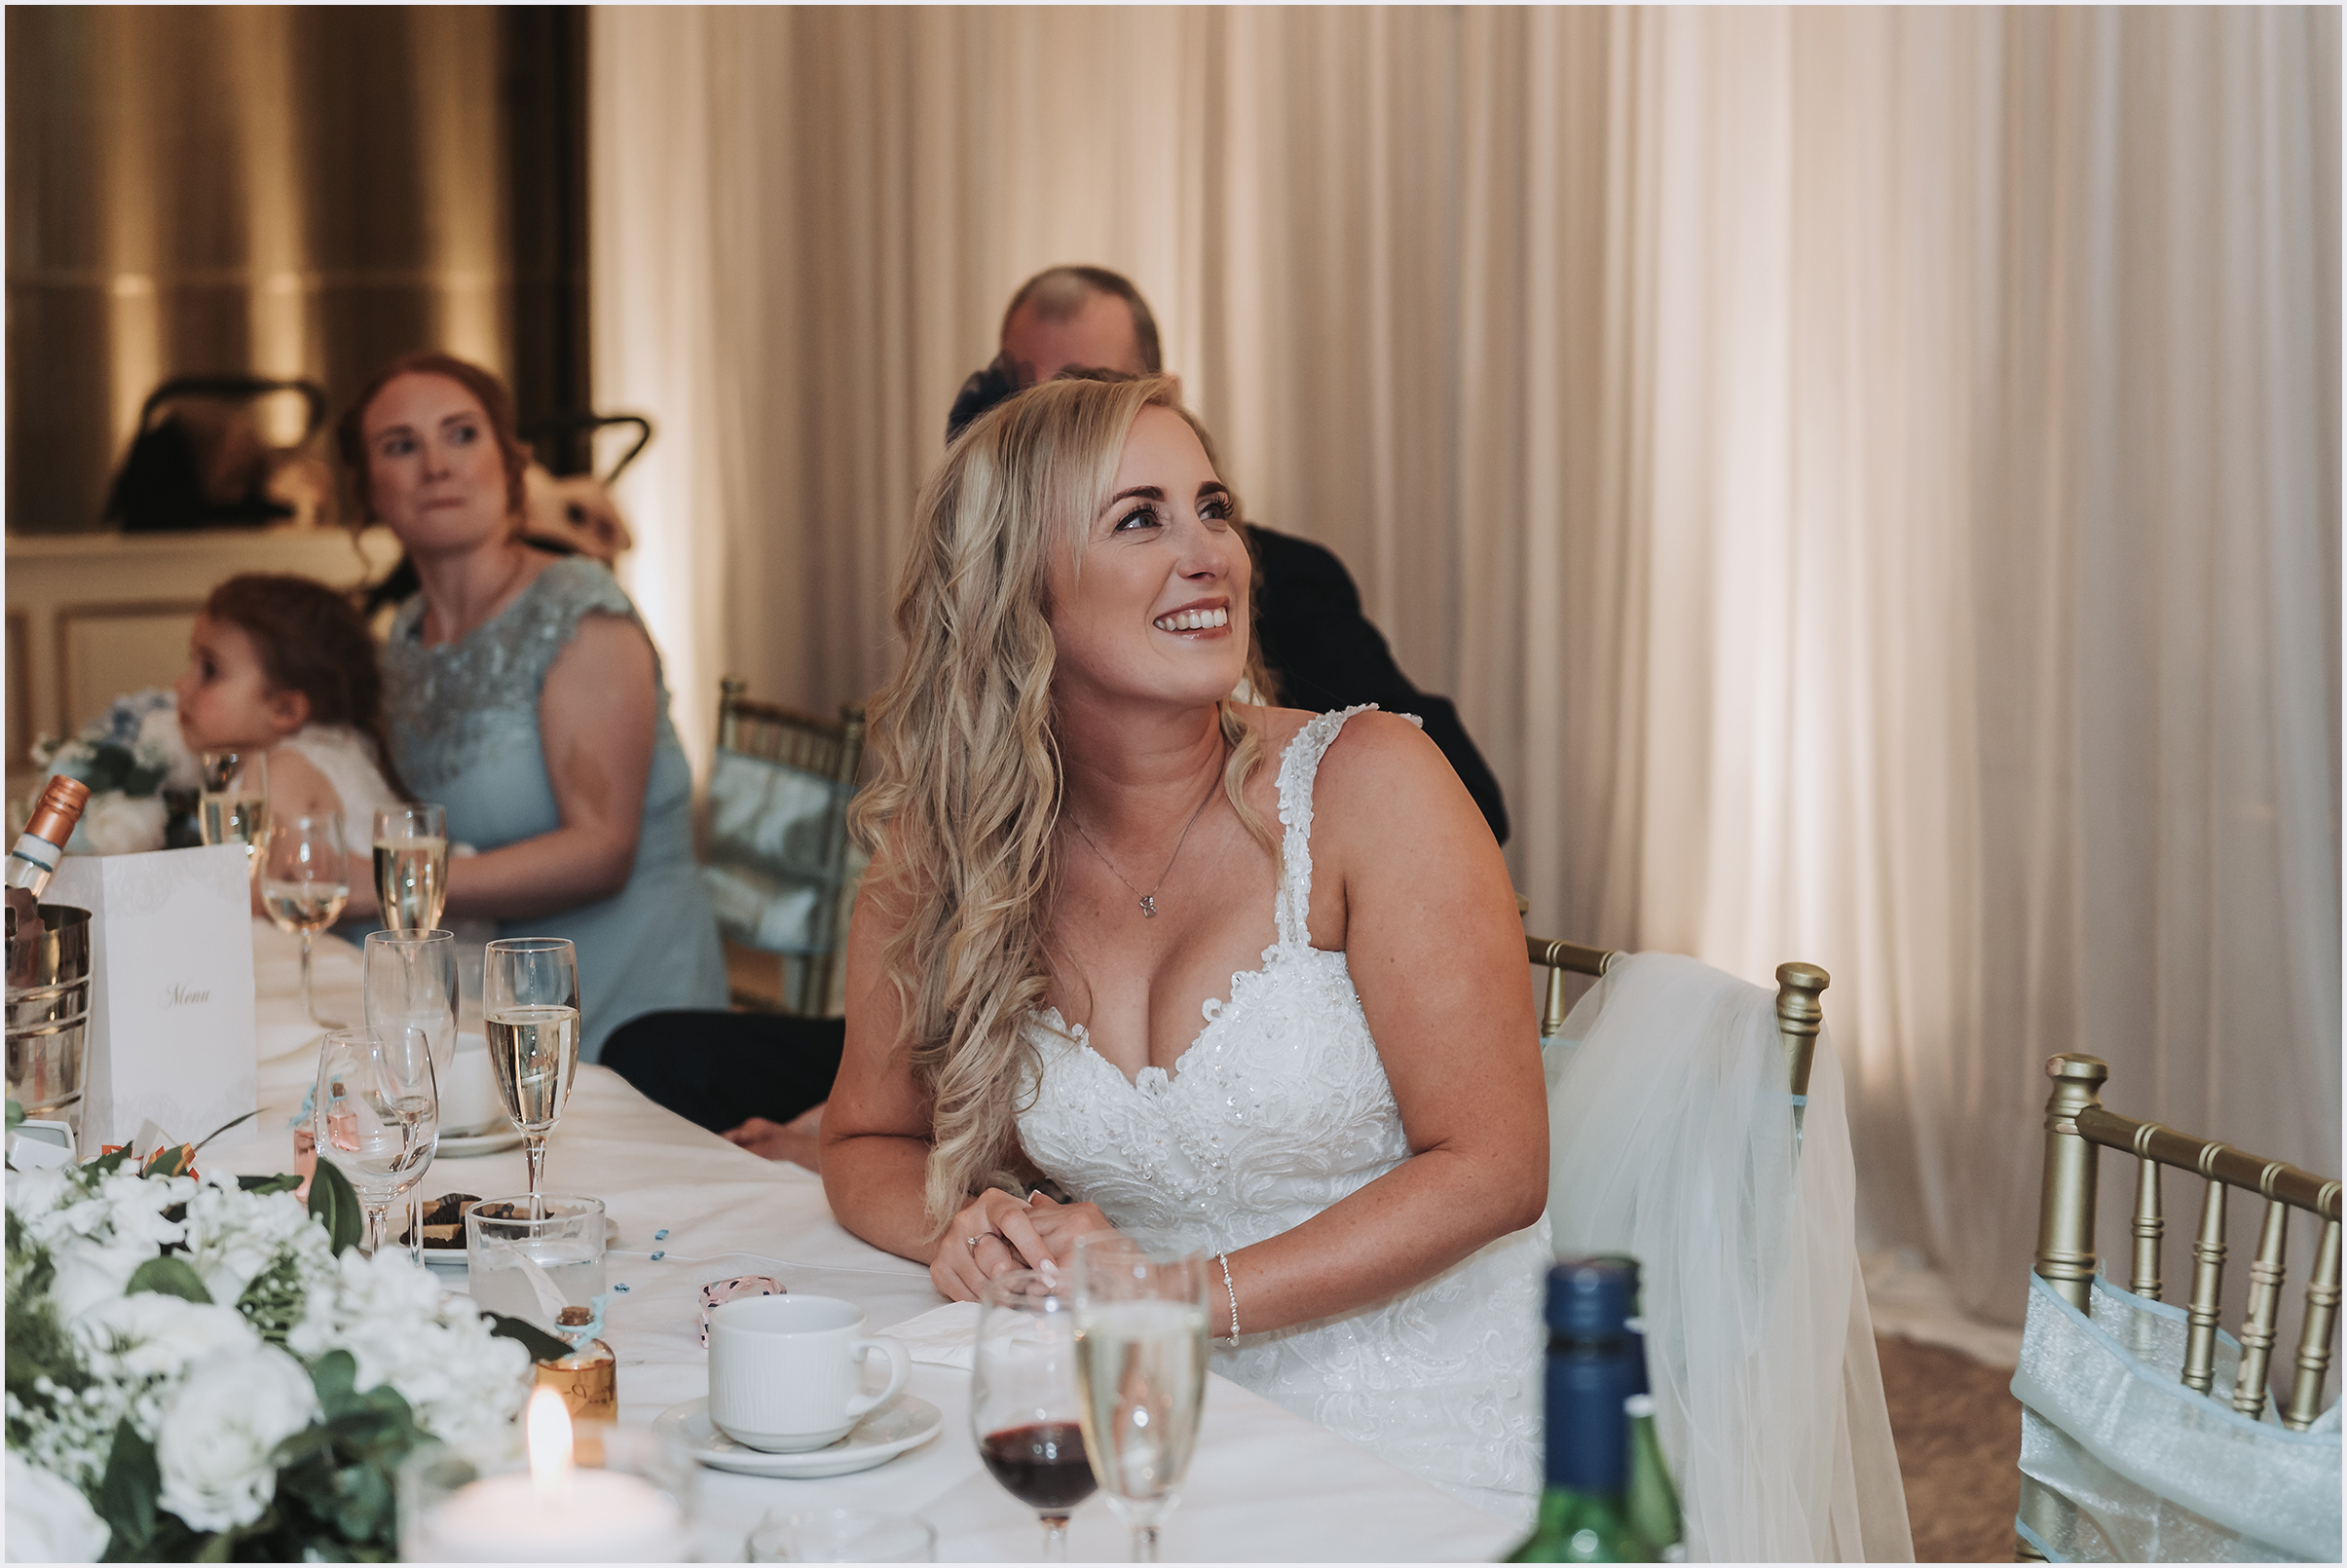 A bride looking up beaming with happiness at her new husband during the speeches at The Grosvenor Pulford Hotel and Spa.